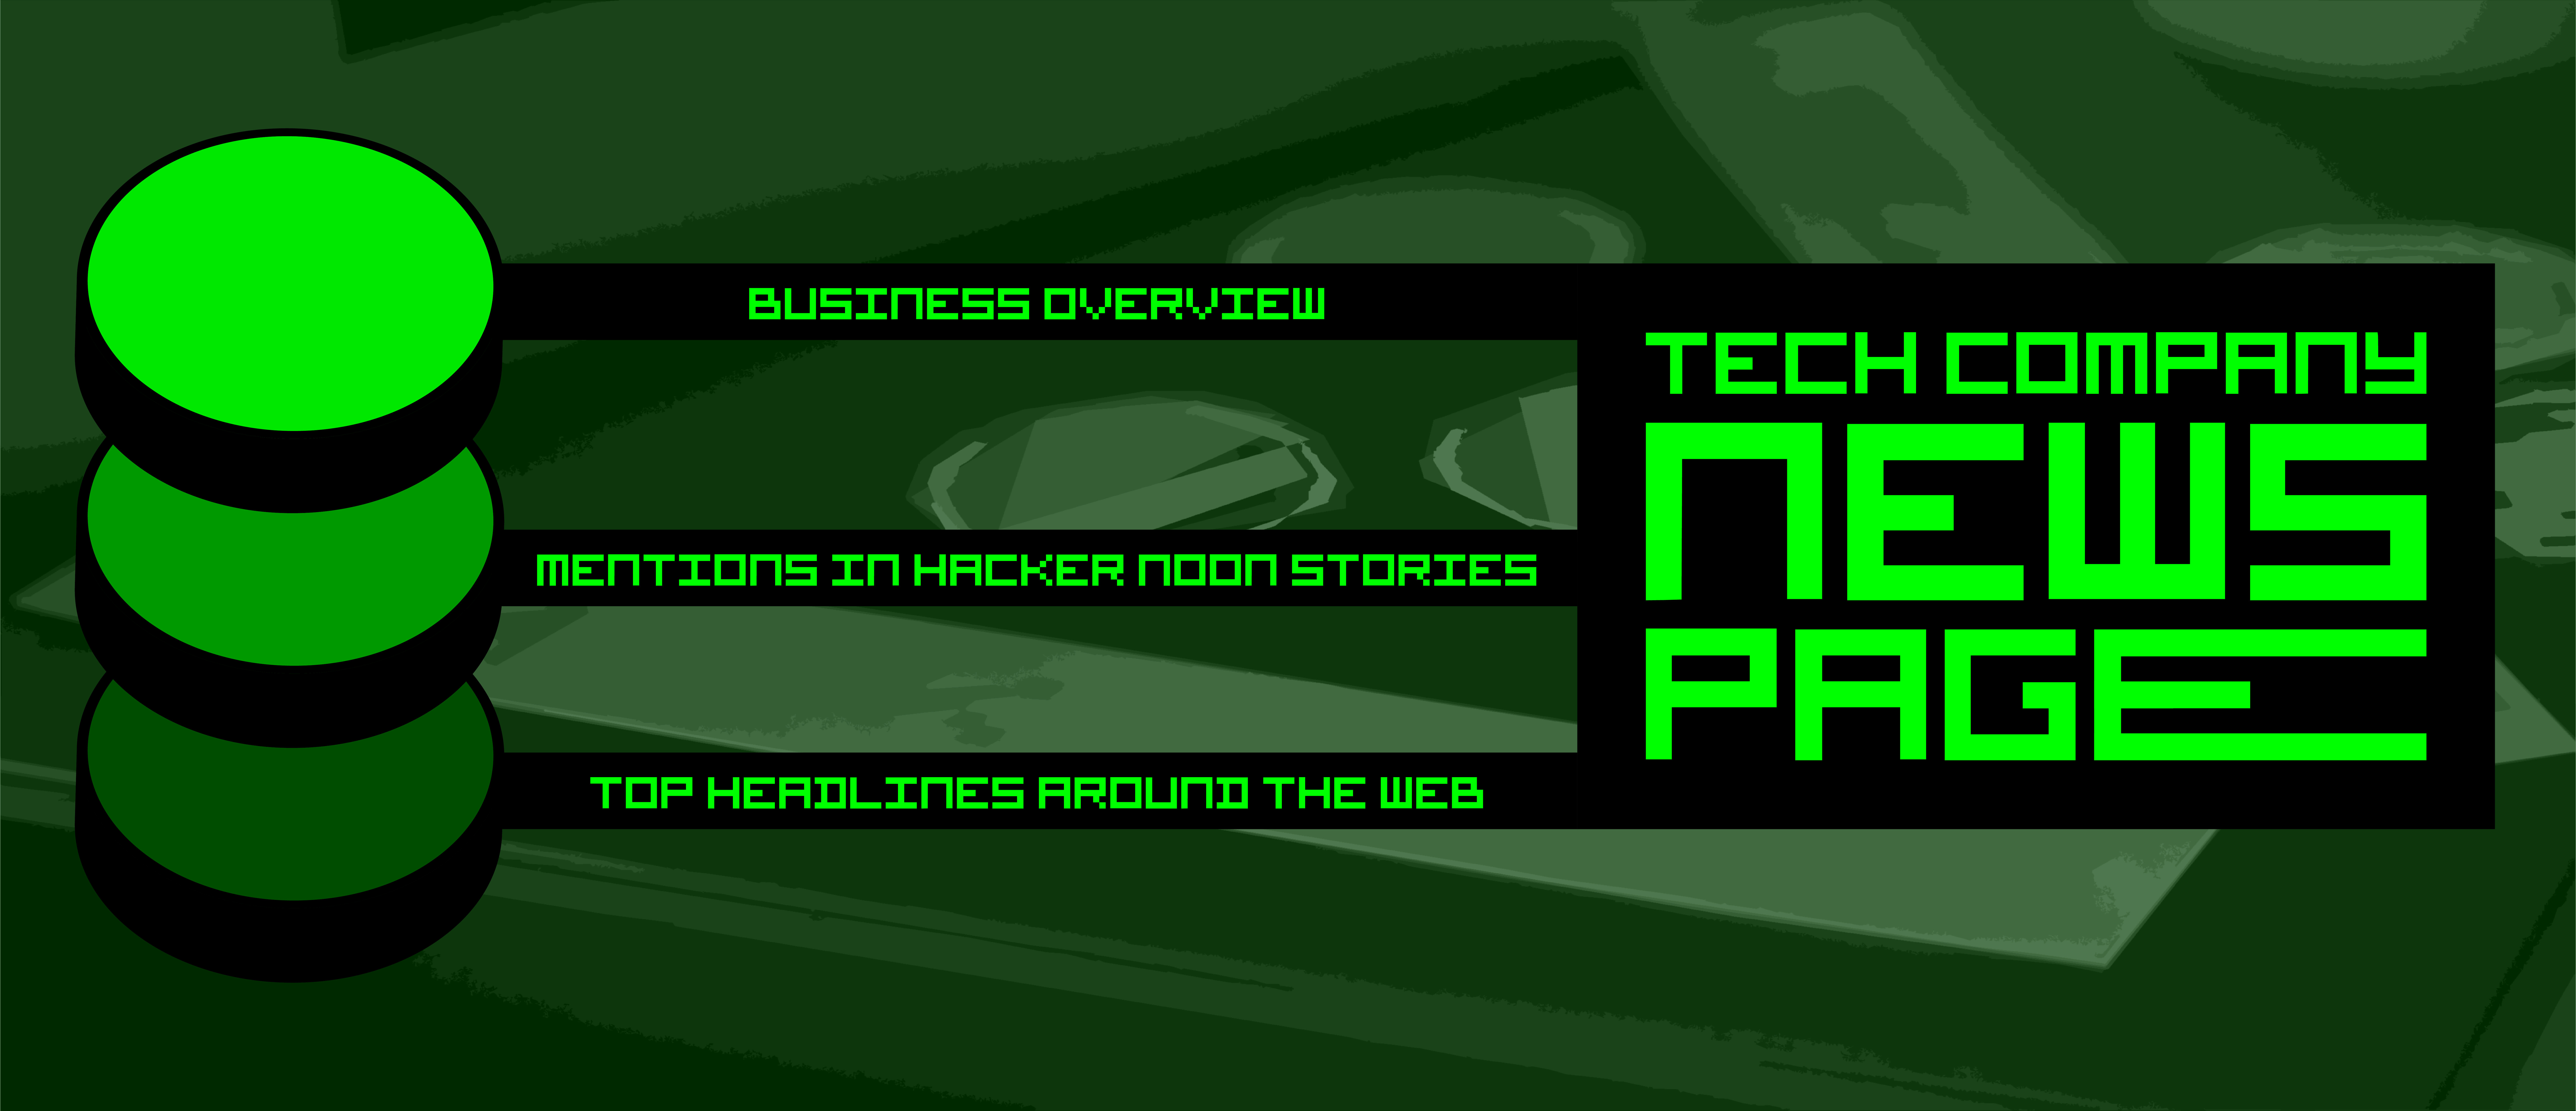 New Feature Alert: 913 Tech Company News Pages on Hacker Noon